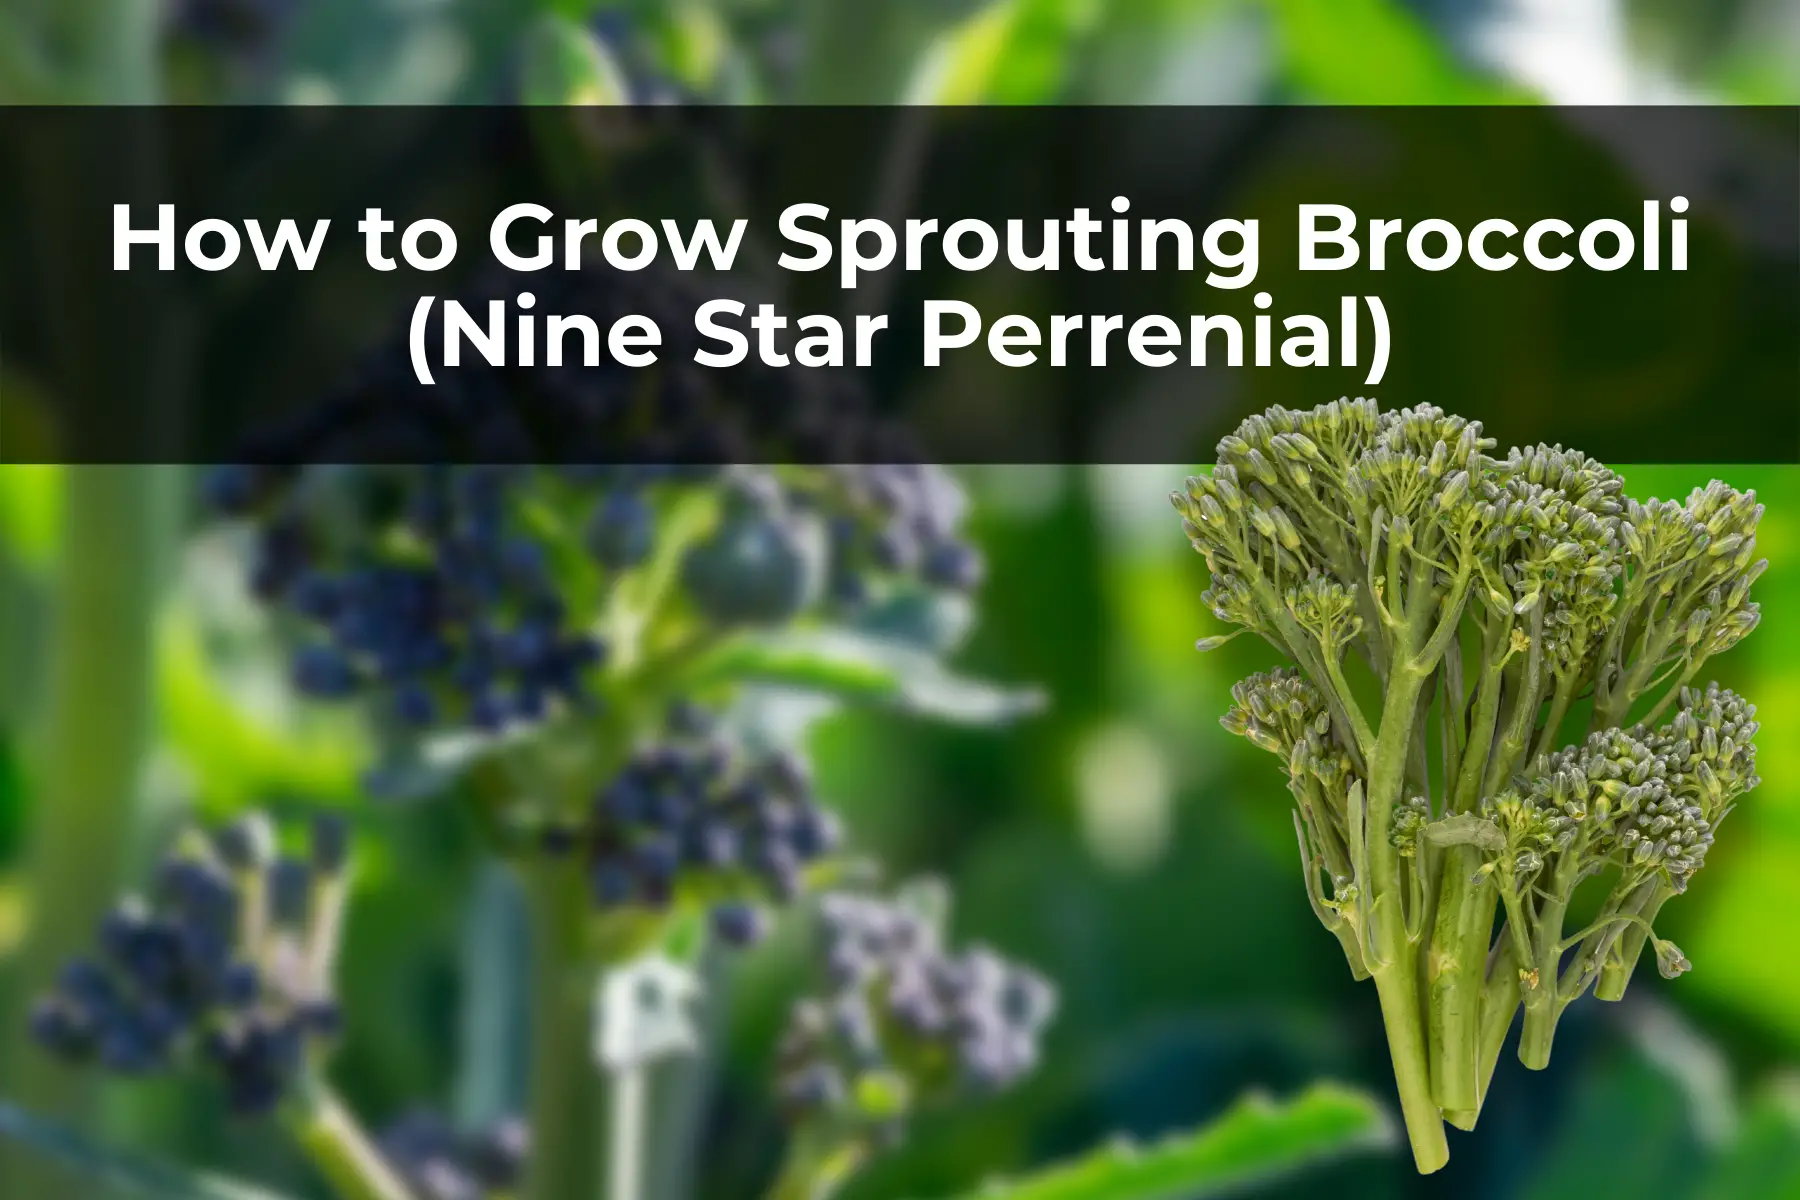 How to Grow Sprouting Broccoli (Nine Star Perrenial)